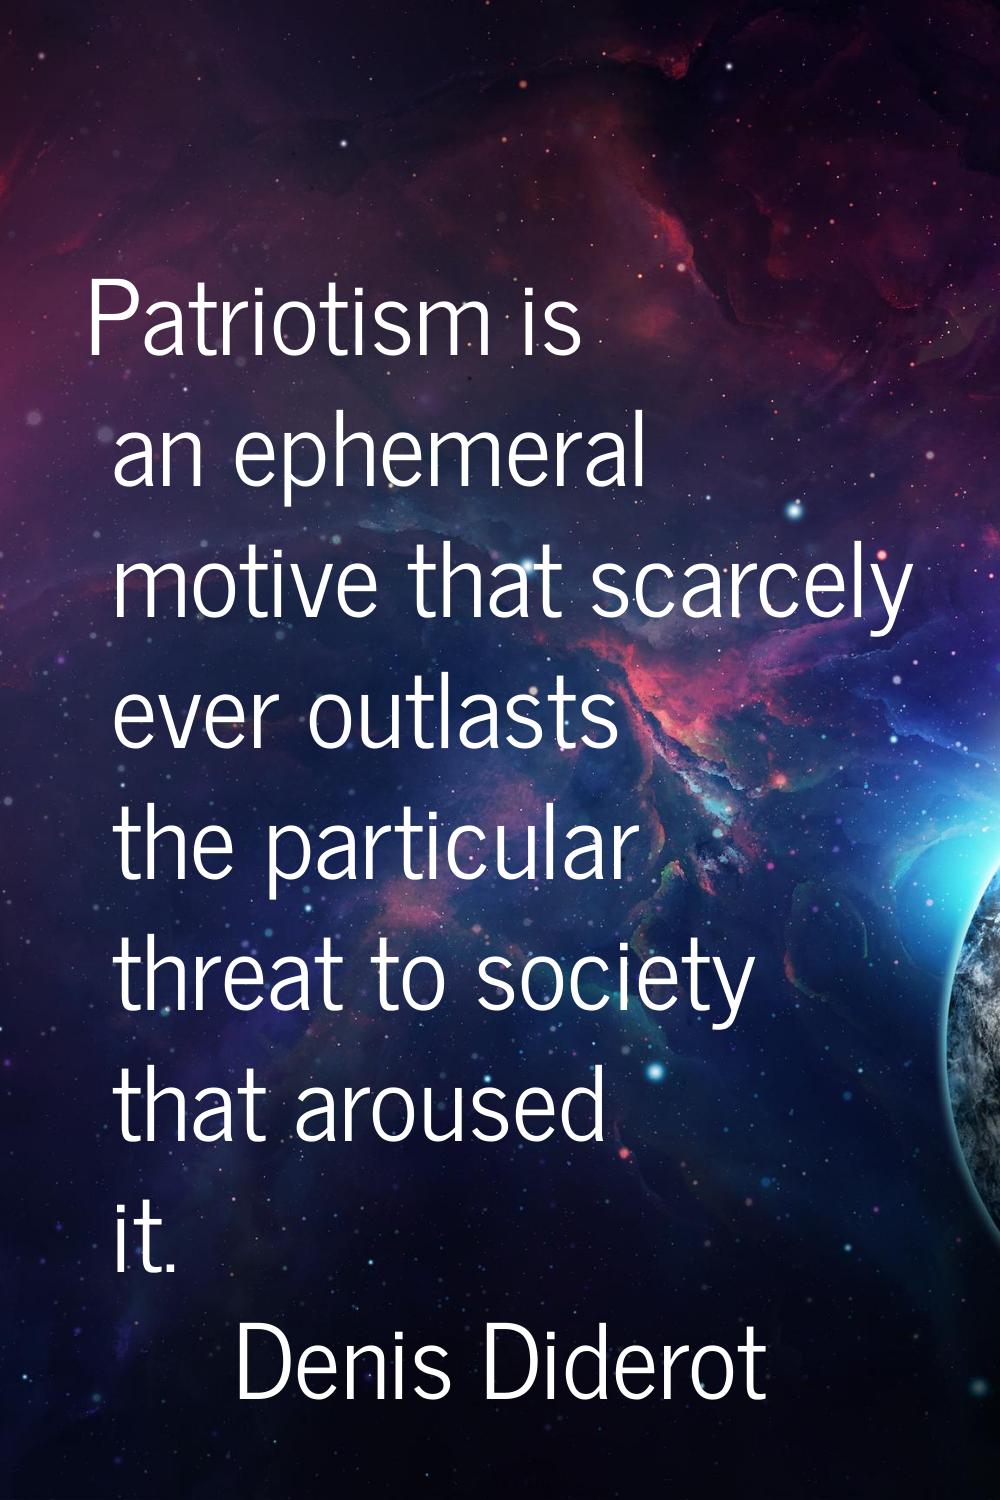 Patriotism is an ephemeral motive that scarcely ever outlasts the particular threat to society that